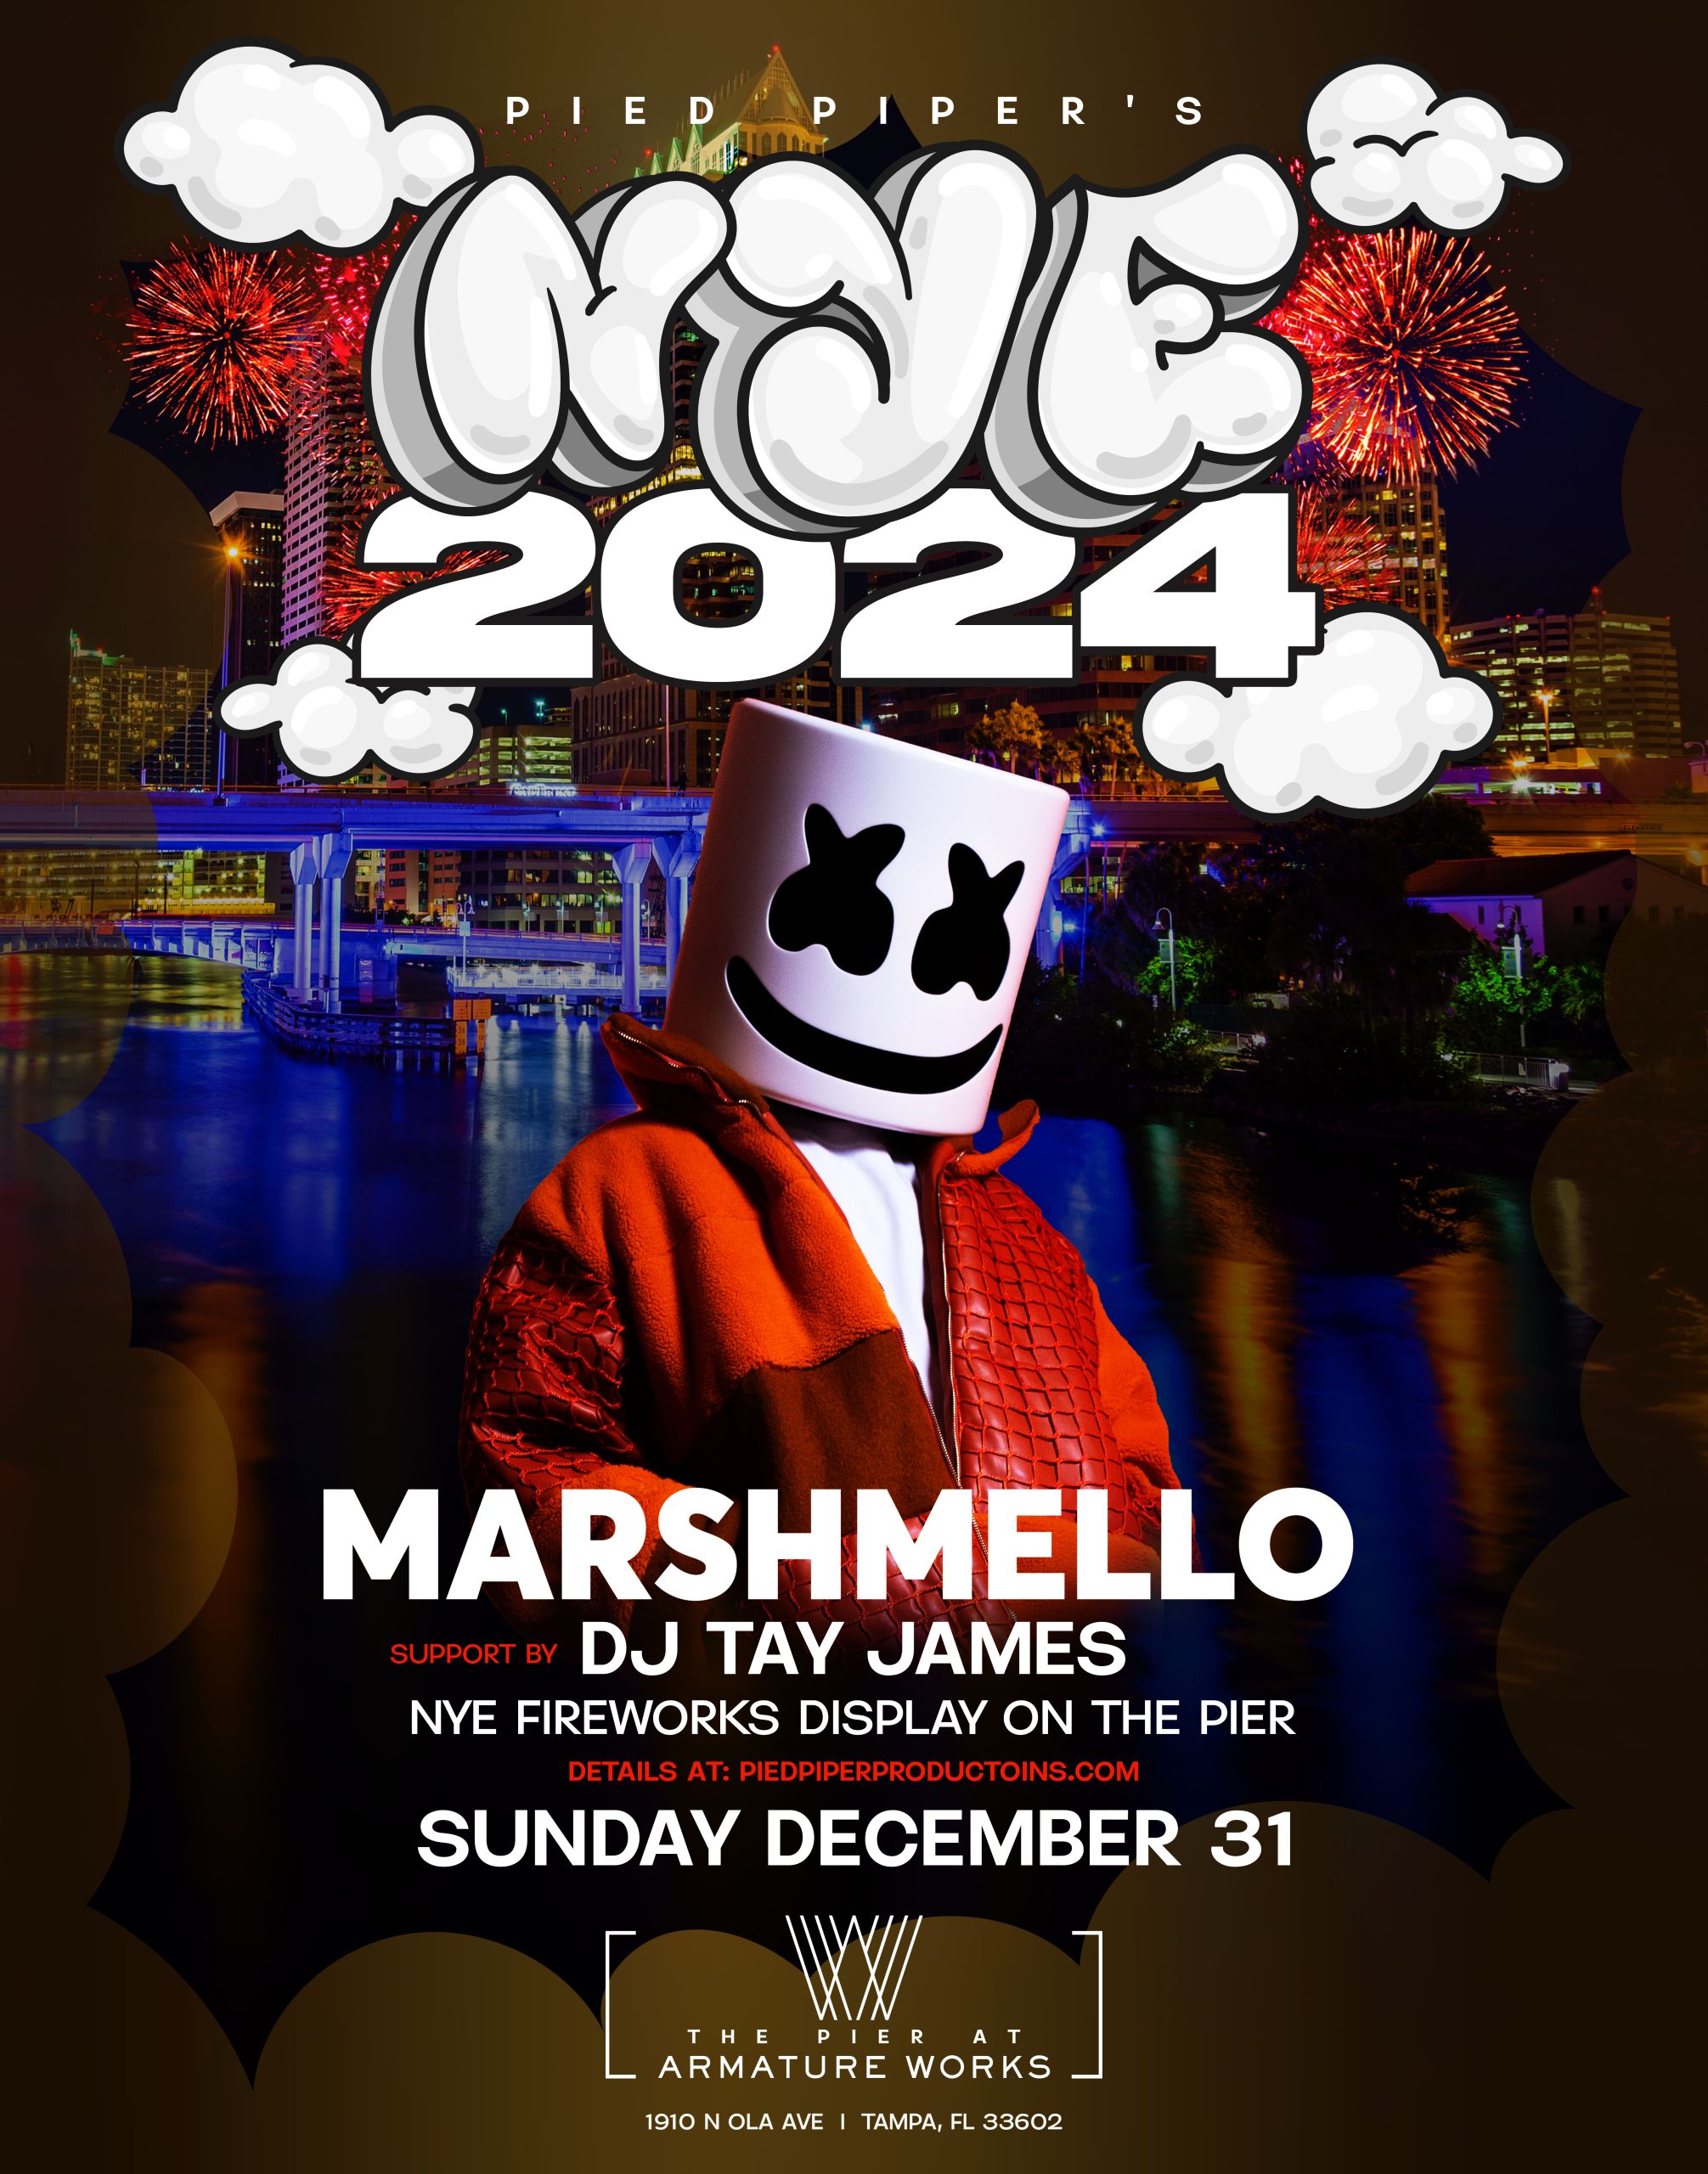 Grammy Nominated Artist, Marshmello to Perform on New Year’s Eve at Armature Works